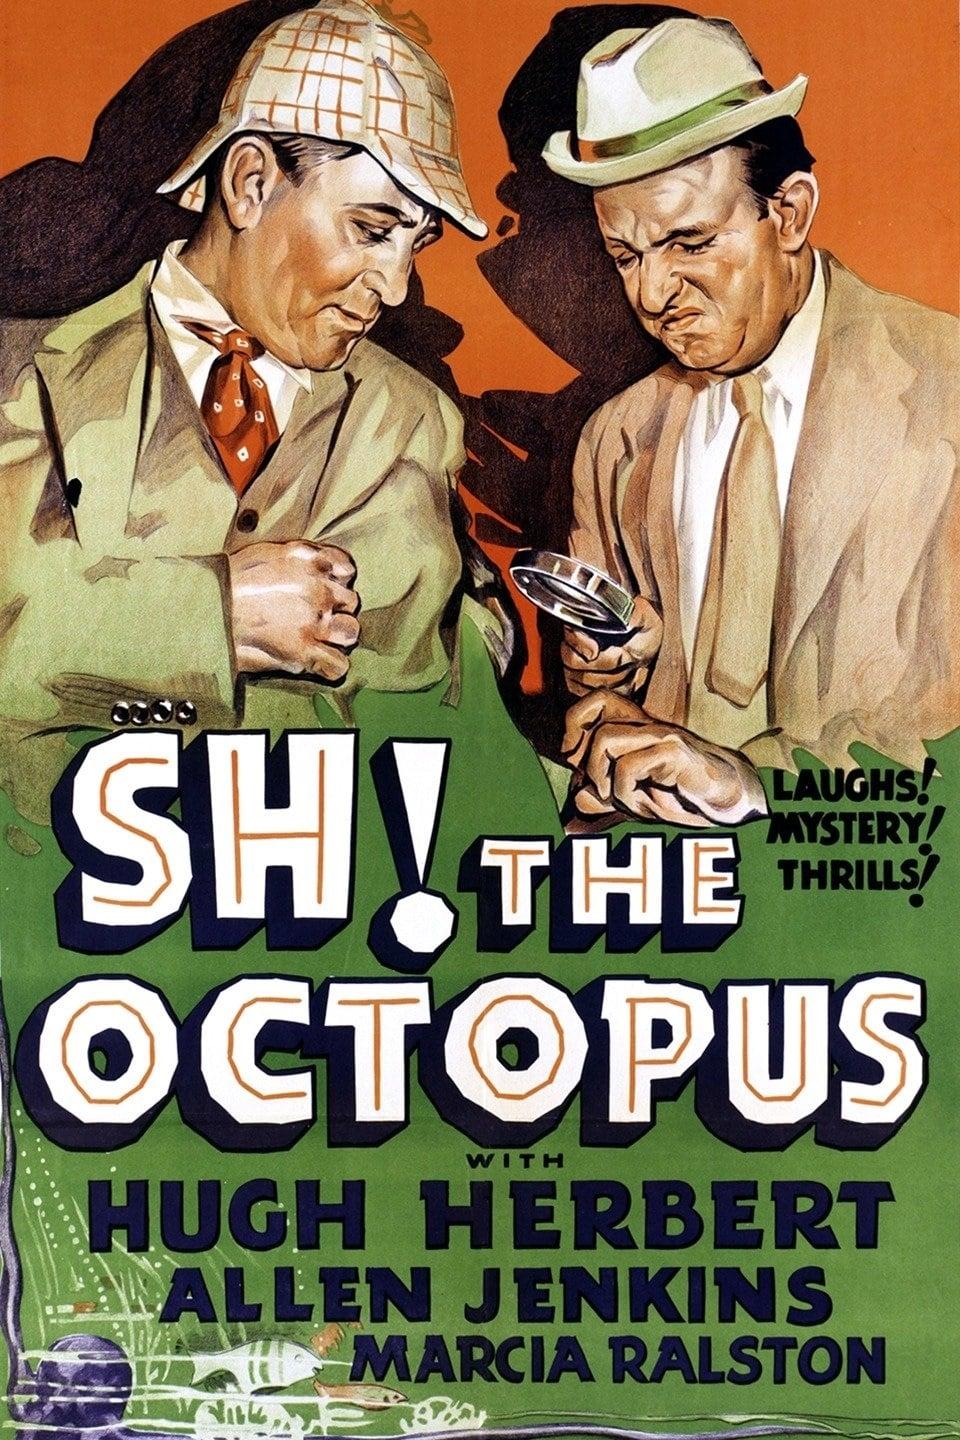 Sh! The Octopus poster